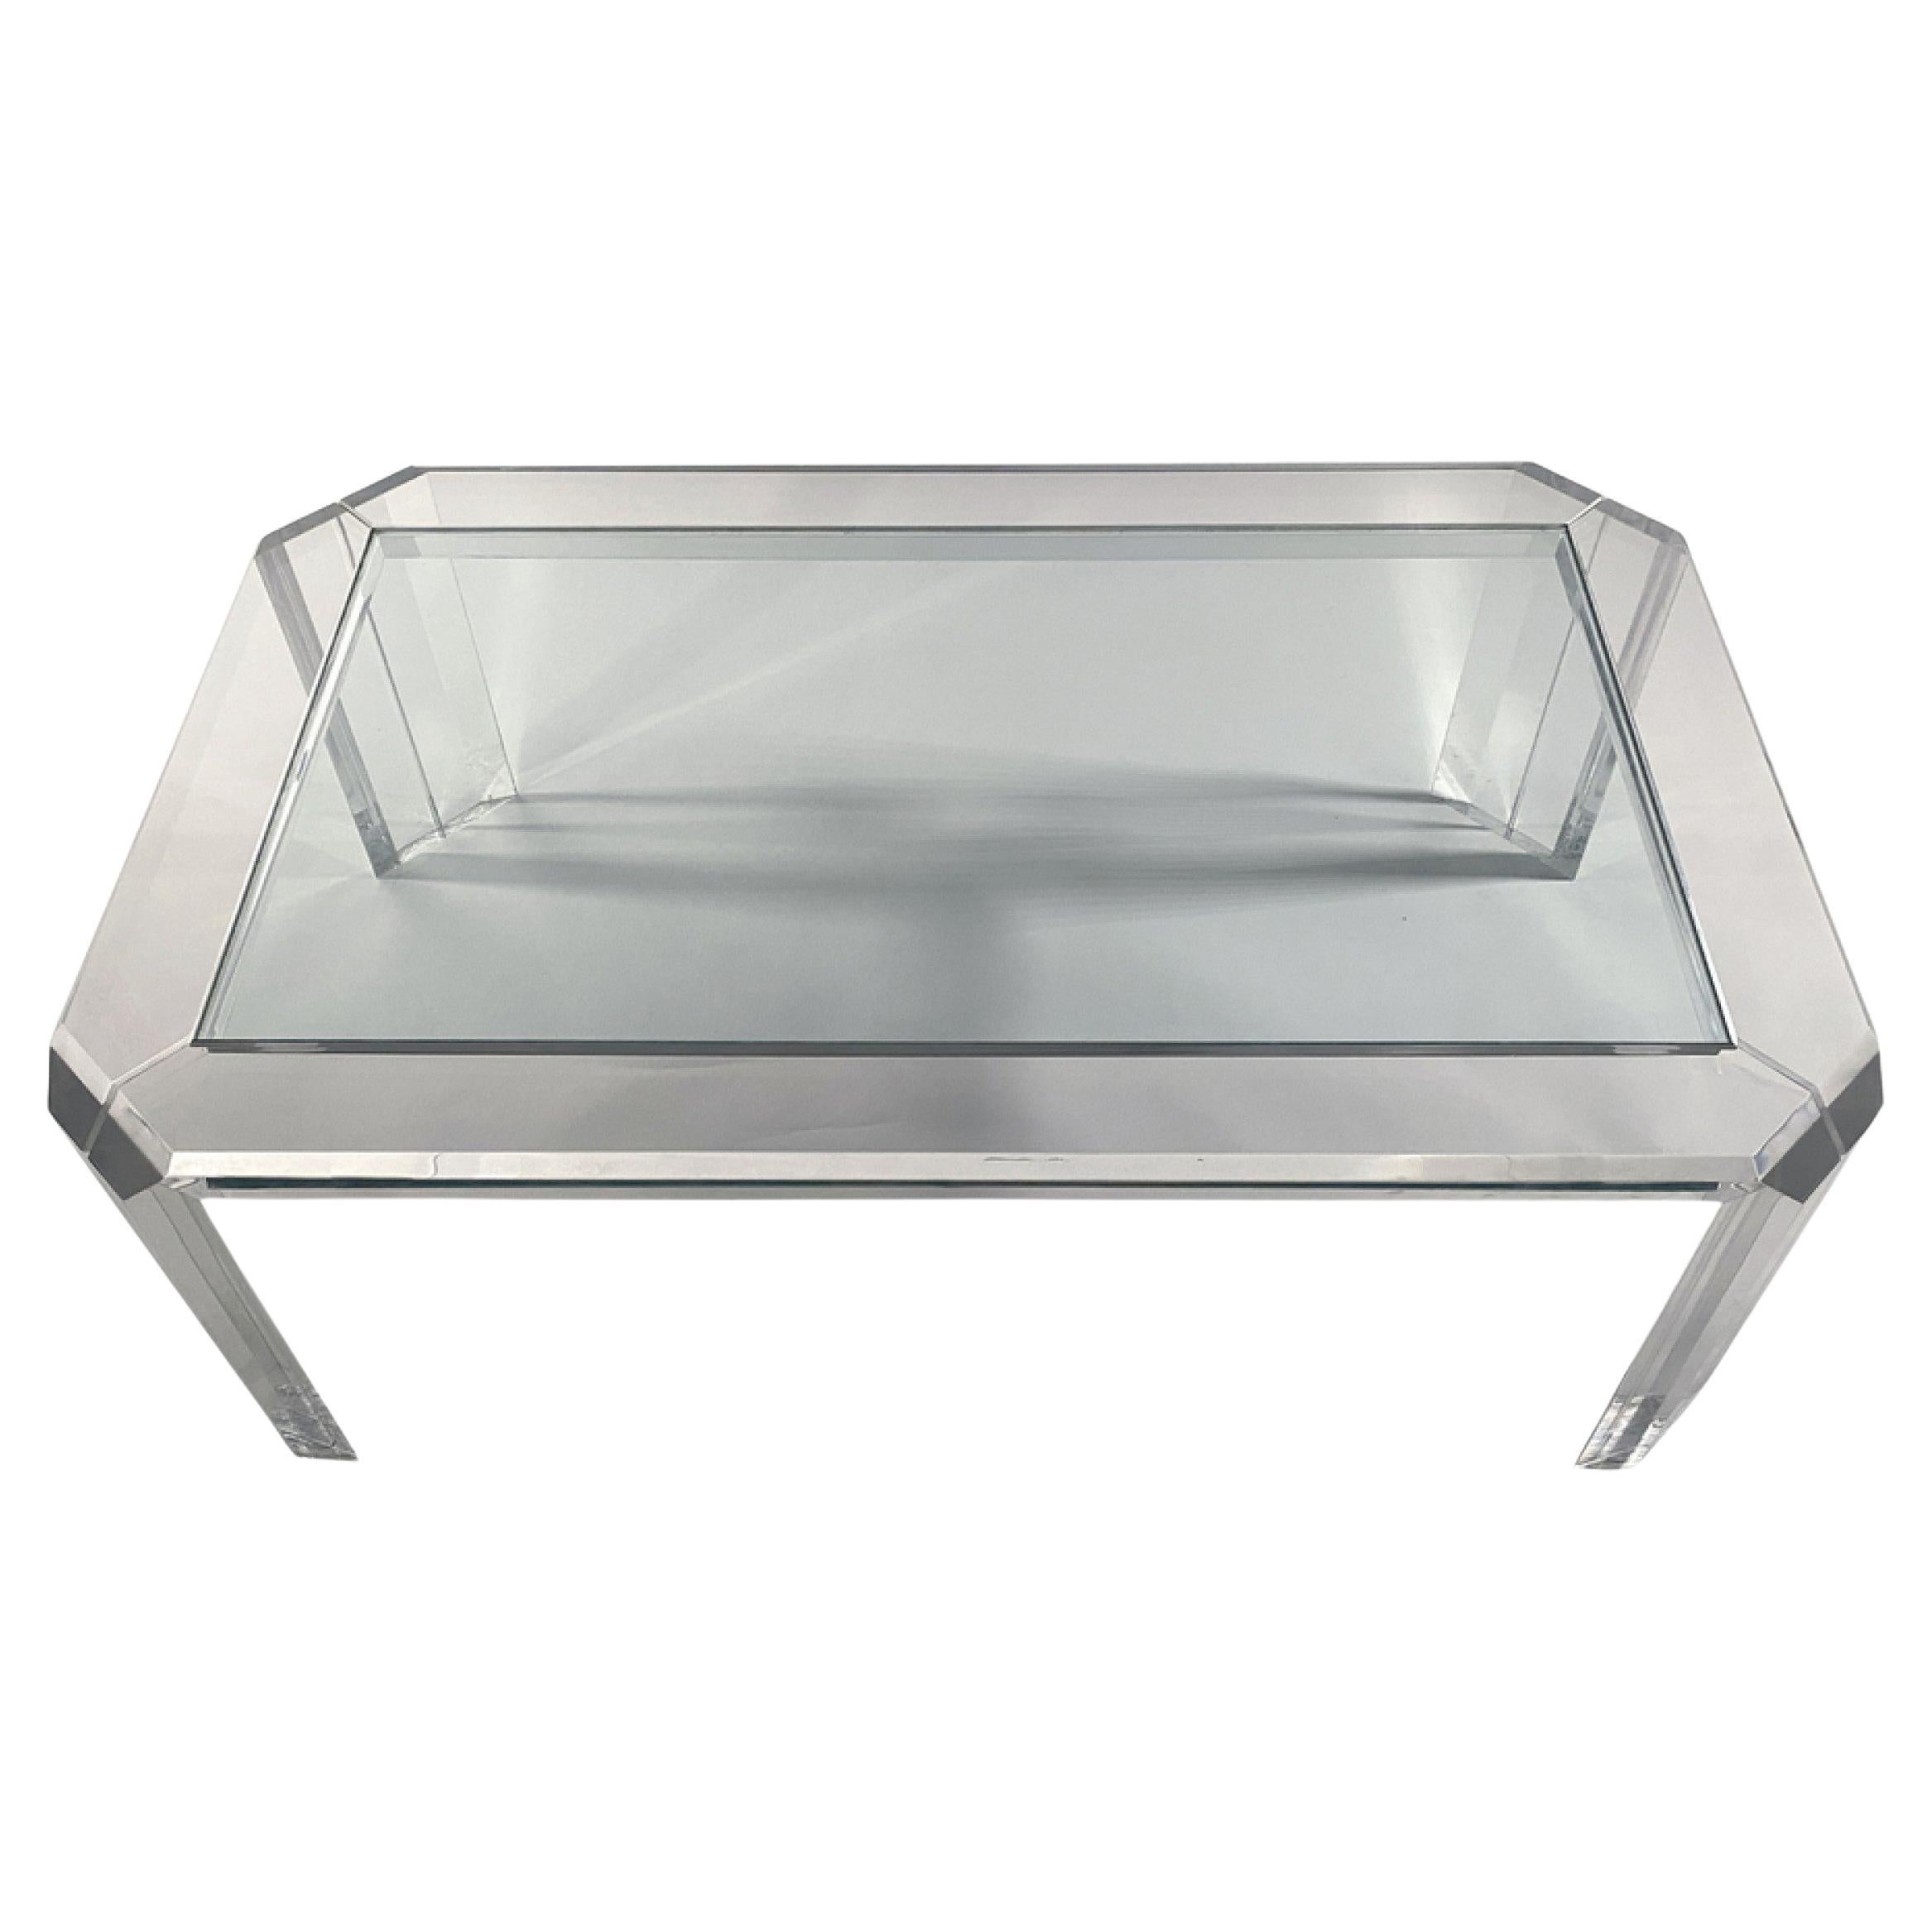 Charles Hollis Jones Midcentury American Modern Lucite Cocktail Table For Sale